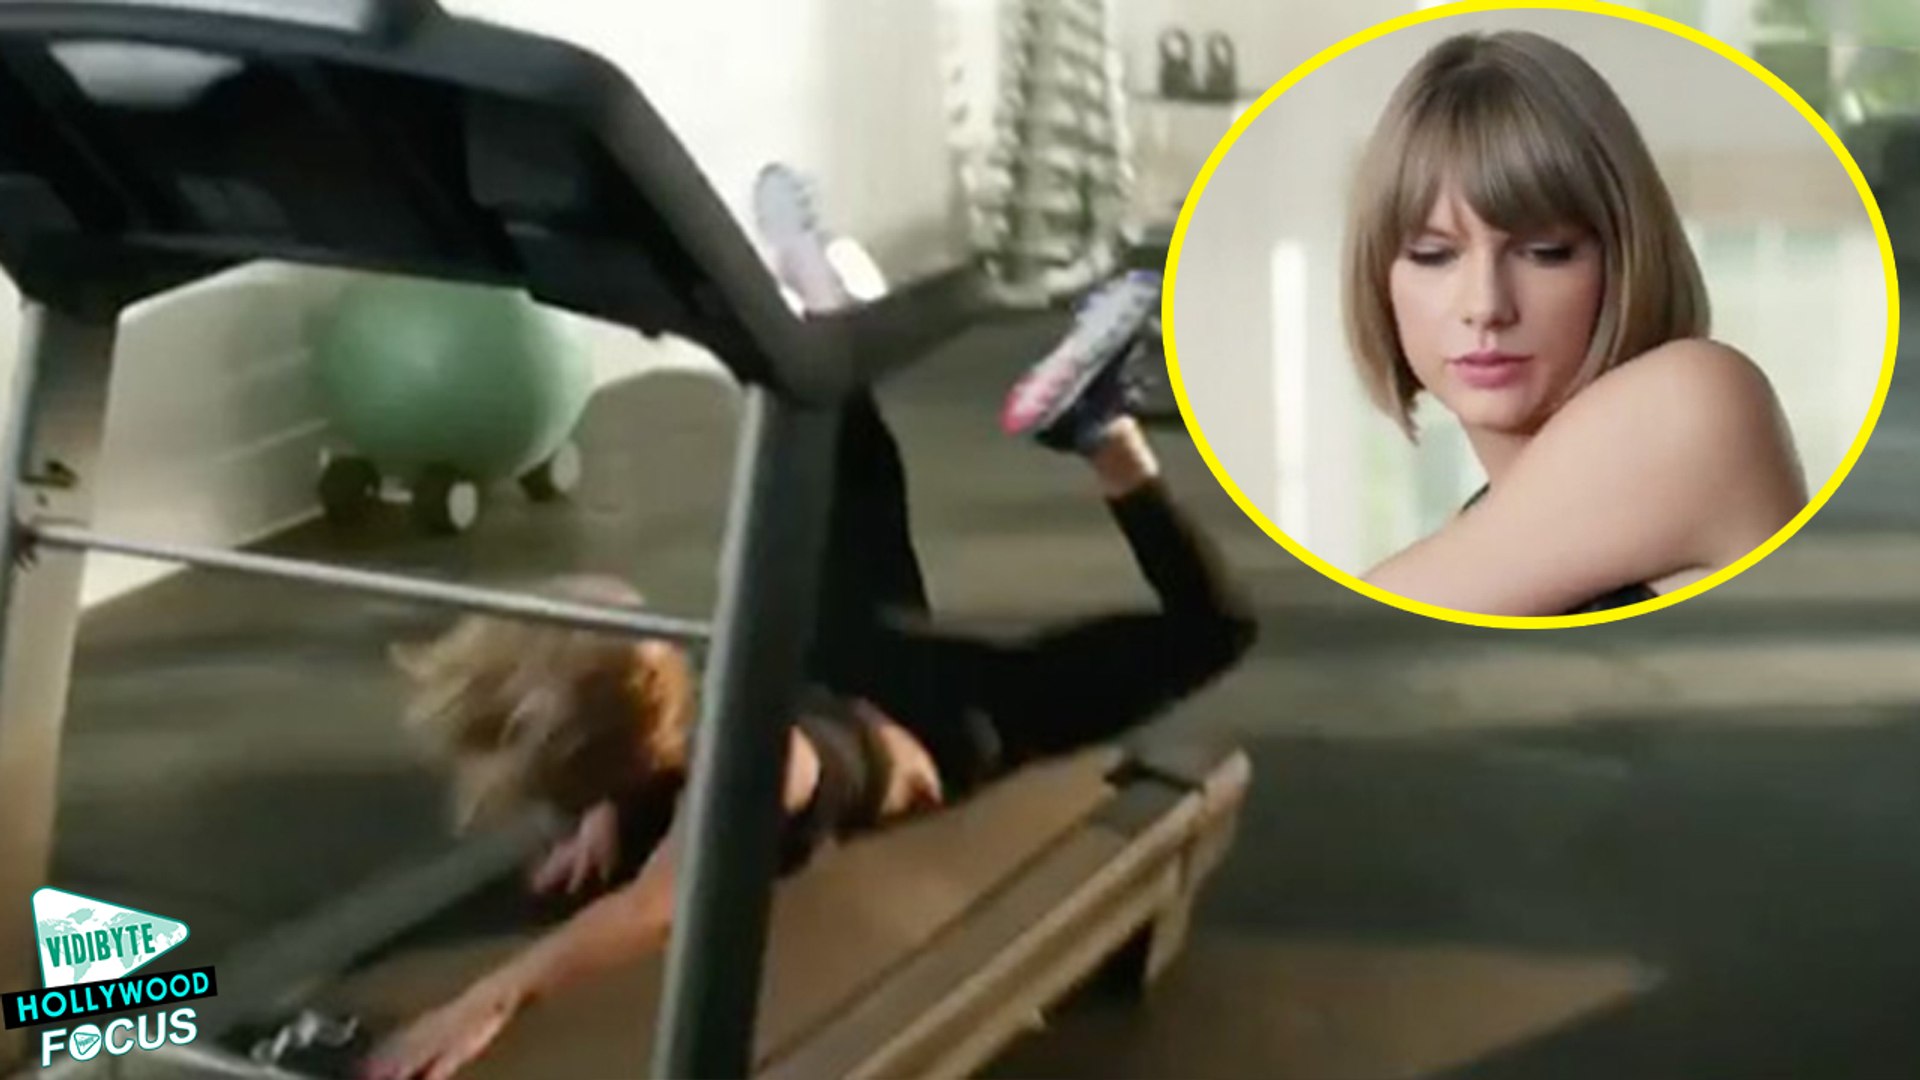 Taylor Swift Fall Off a Treadmill While Rapping to Drake